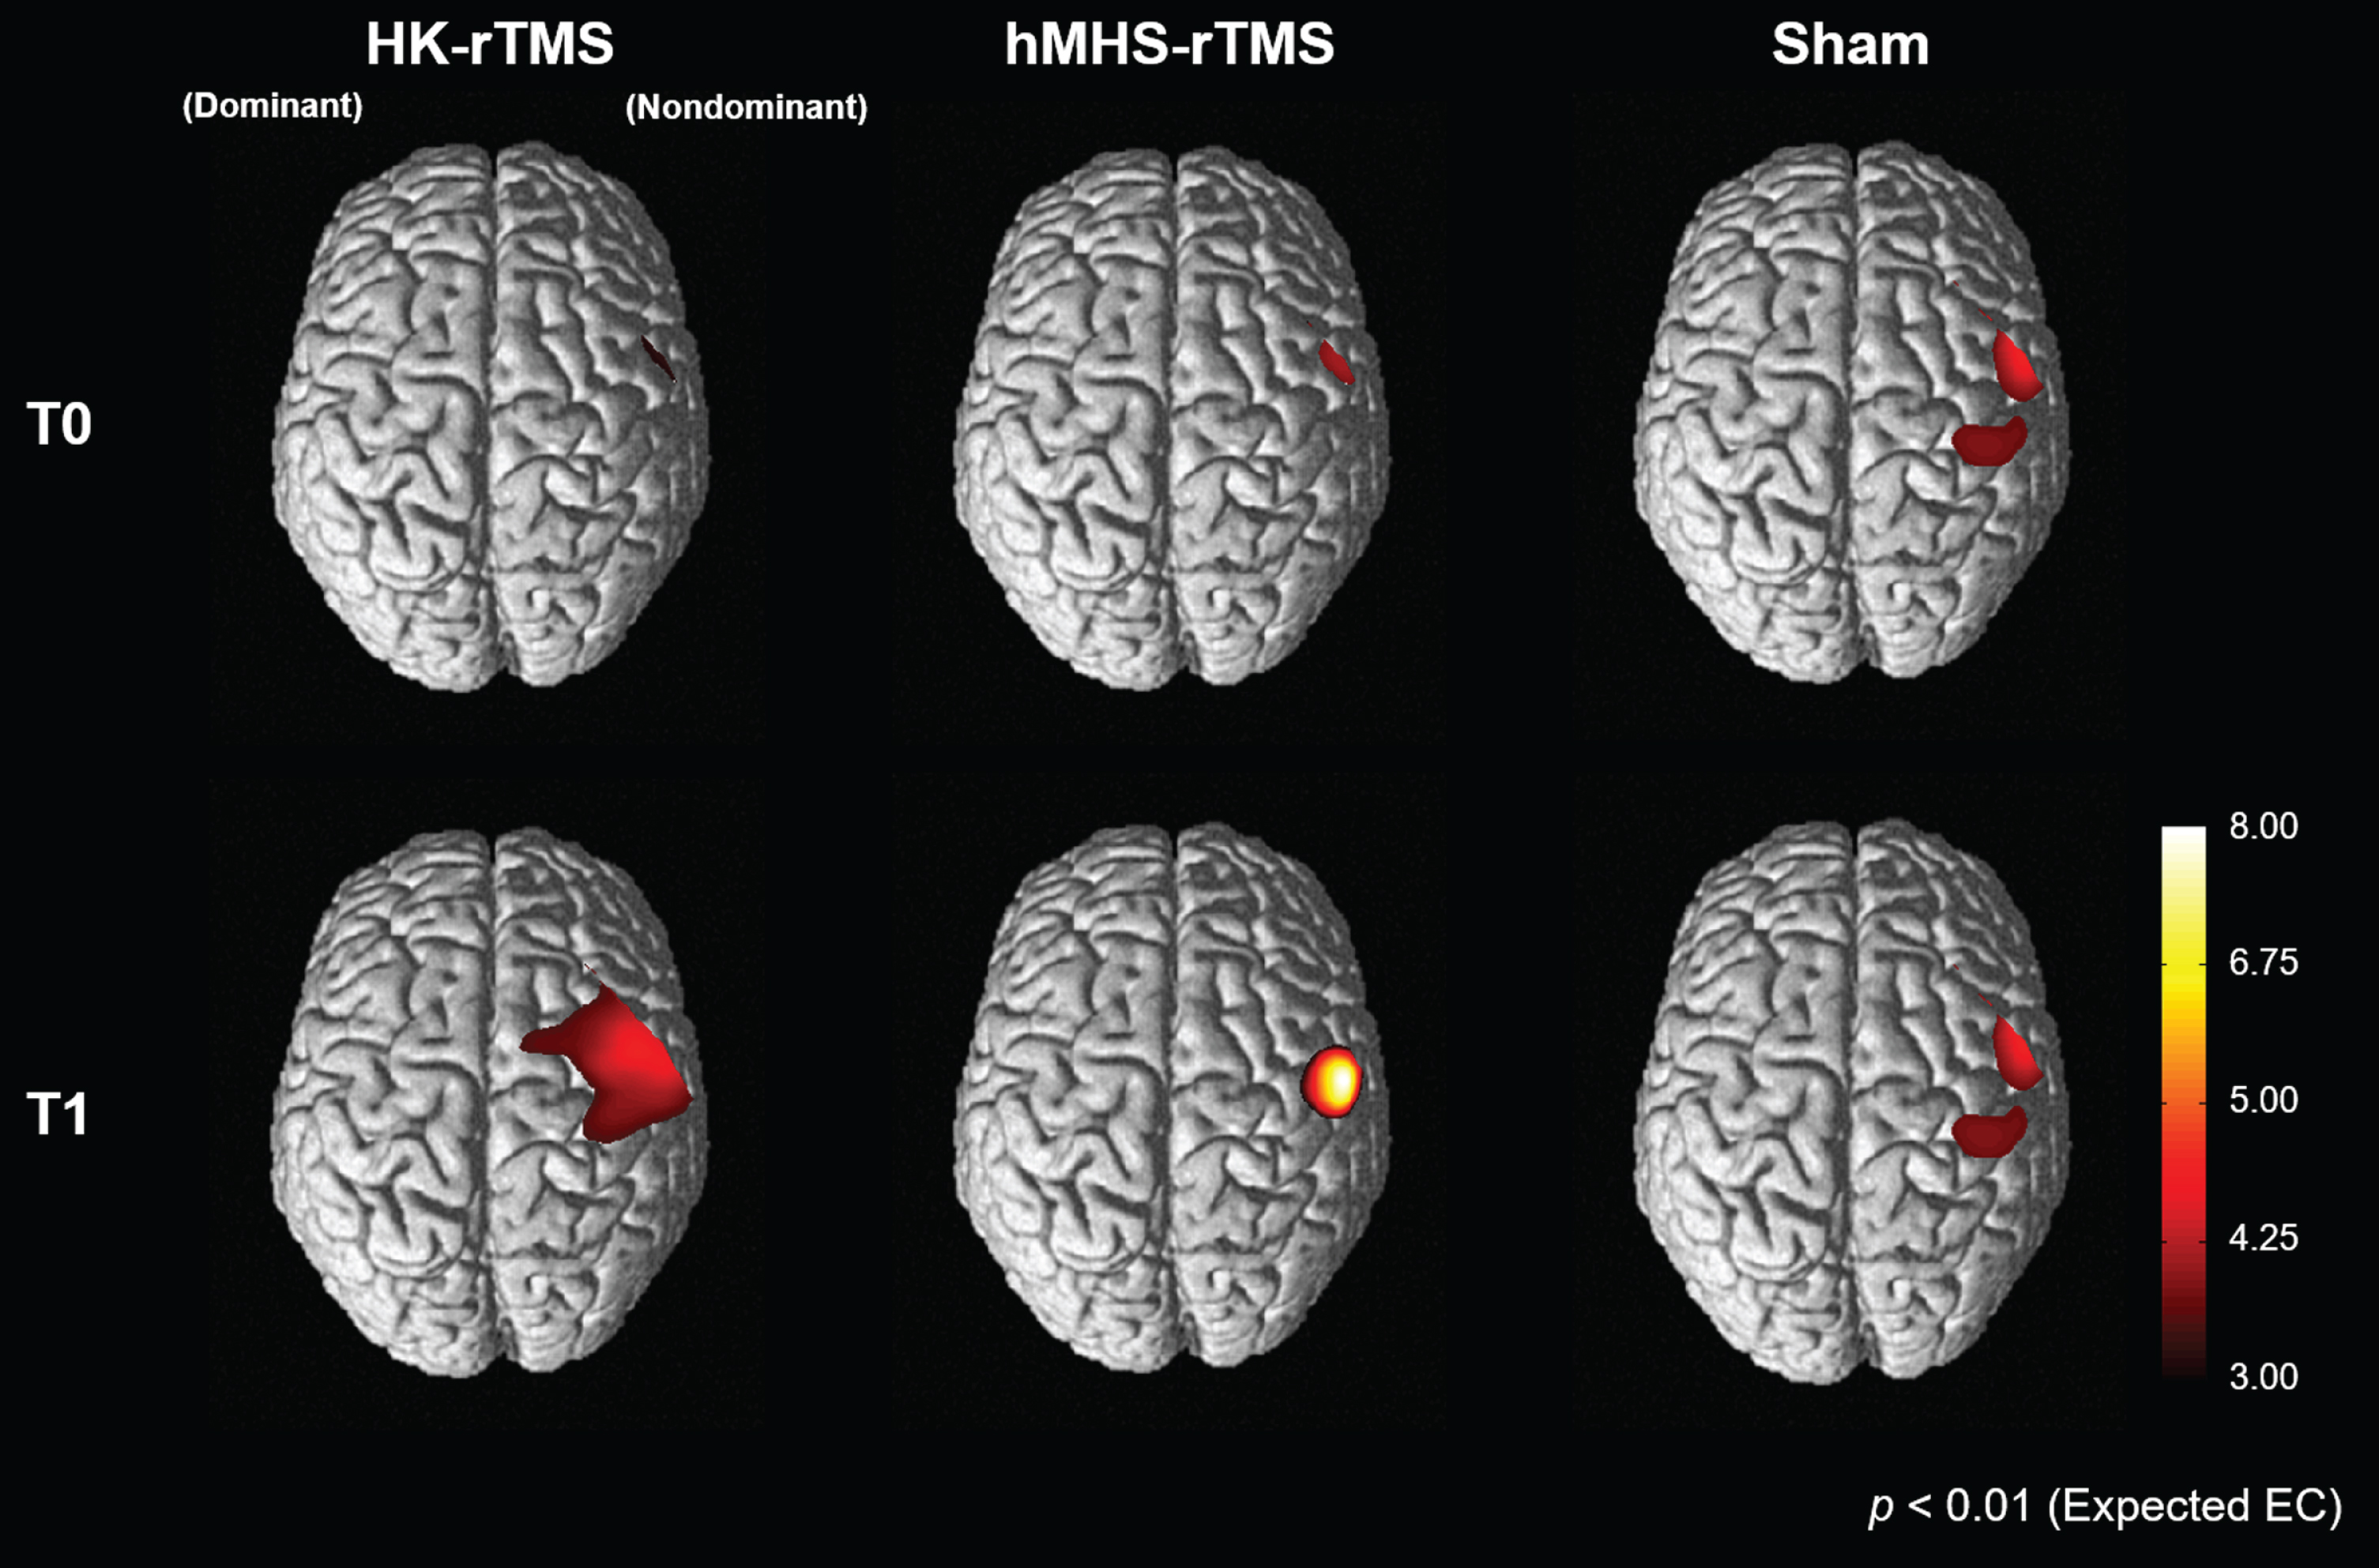 Cortical activation patterns during a non-dominant serial reaction time task before (T0) and after (T1) rTMS stimulation. Cortical activation of the non-dominant hemisphere increased after low-frequency rTMS in the HK-rTMS and hMHS-rTMS. There was no significant change in the Sham-rTMS. T0, before rTMS stimulation; T1, after rTMS stimulation; rTMS, repetitive transcranial magnetic stimulation; HK, anatomical hand knob; hMHS, hand motor hotspot